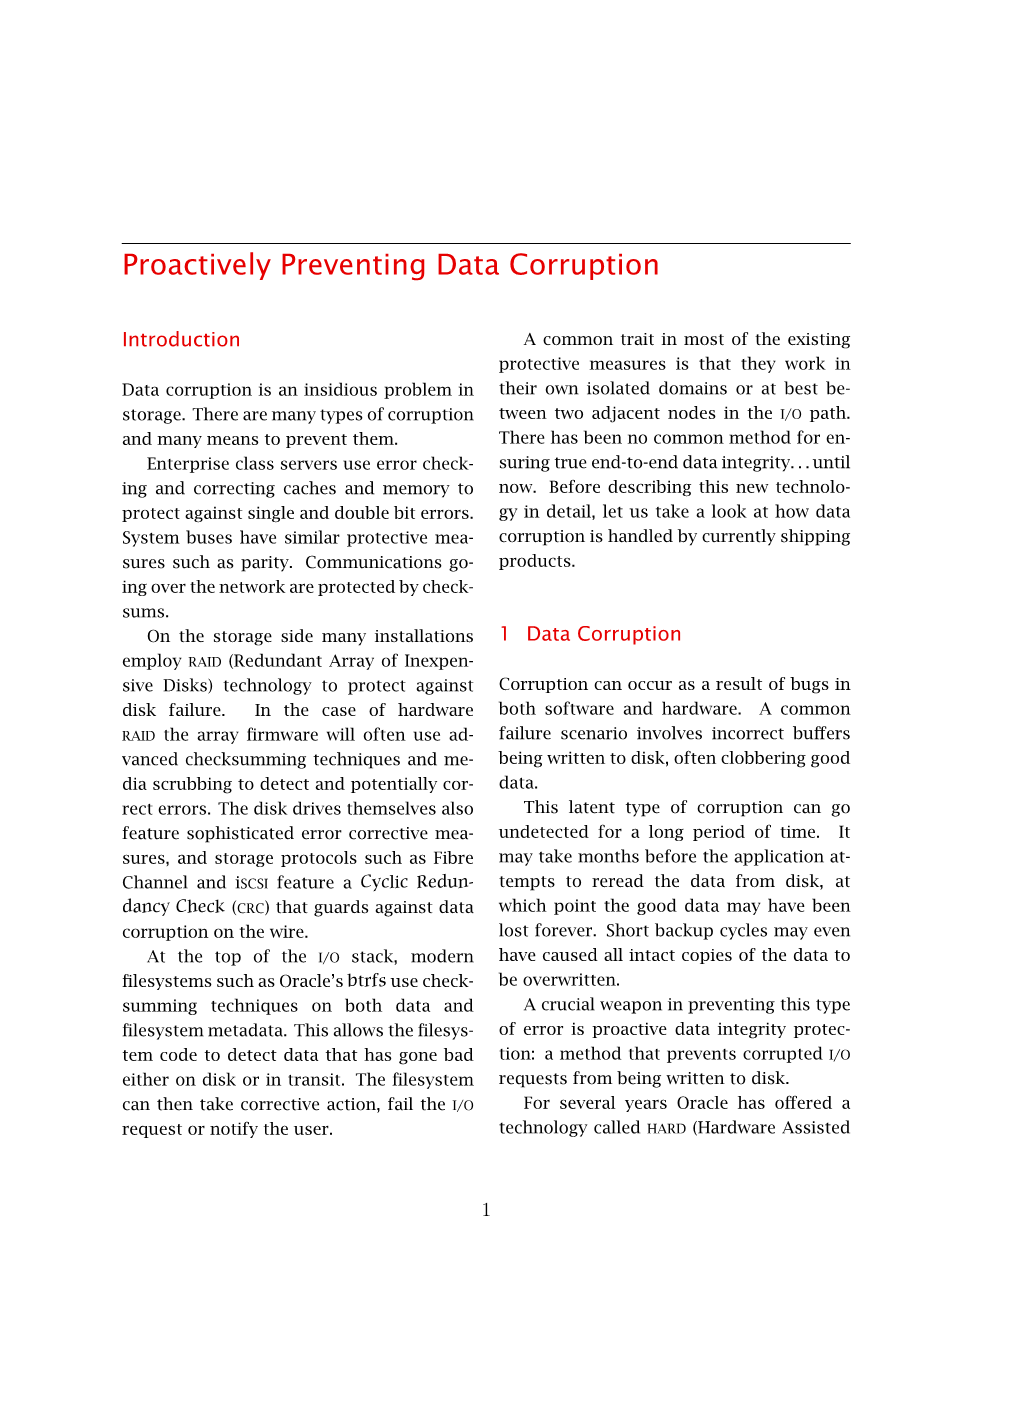 Proactively Preventing Data Corruption